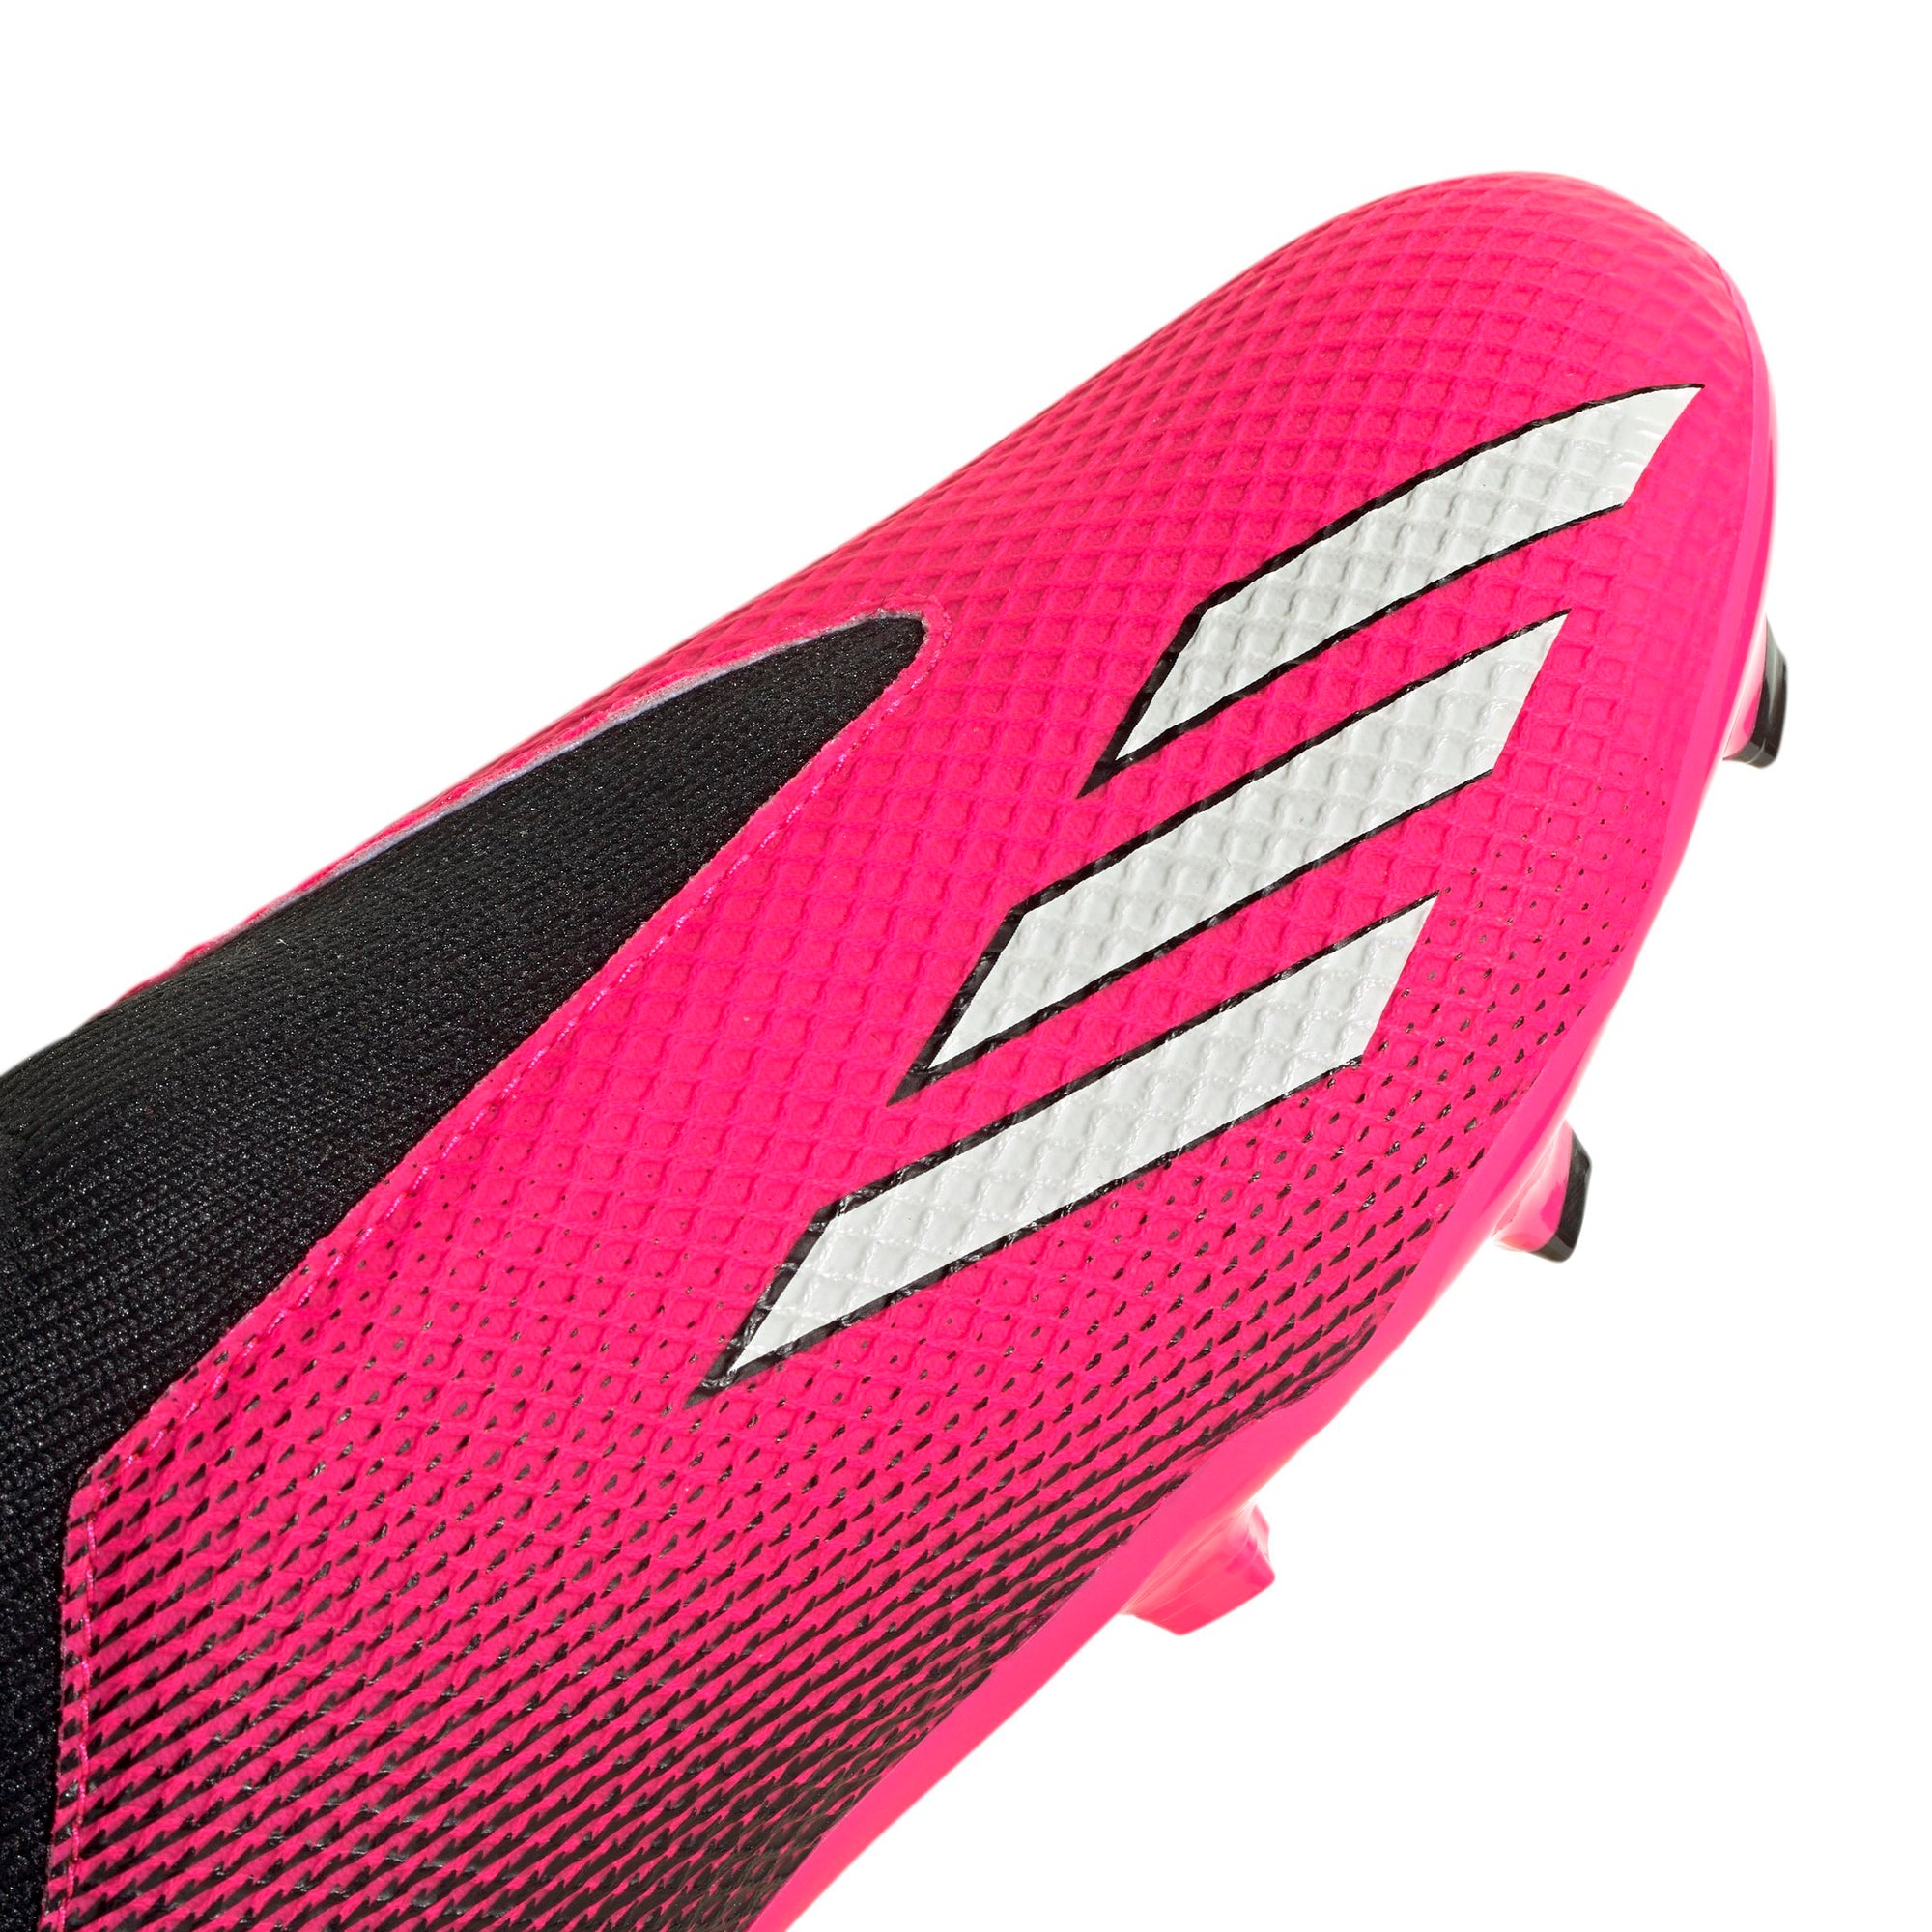 adidas Youth X Speedportal.3 LL Firm Ground Soccer Cleats | GZ5061 Cleats Adidas 